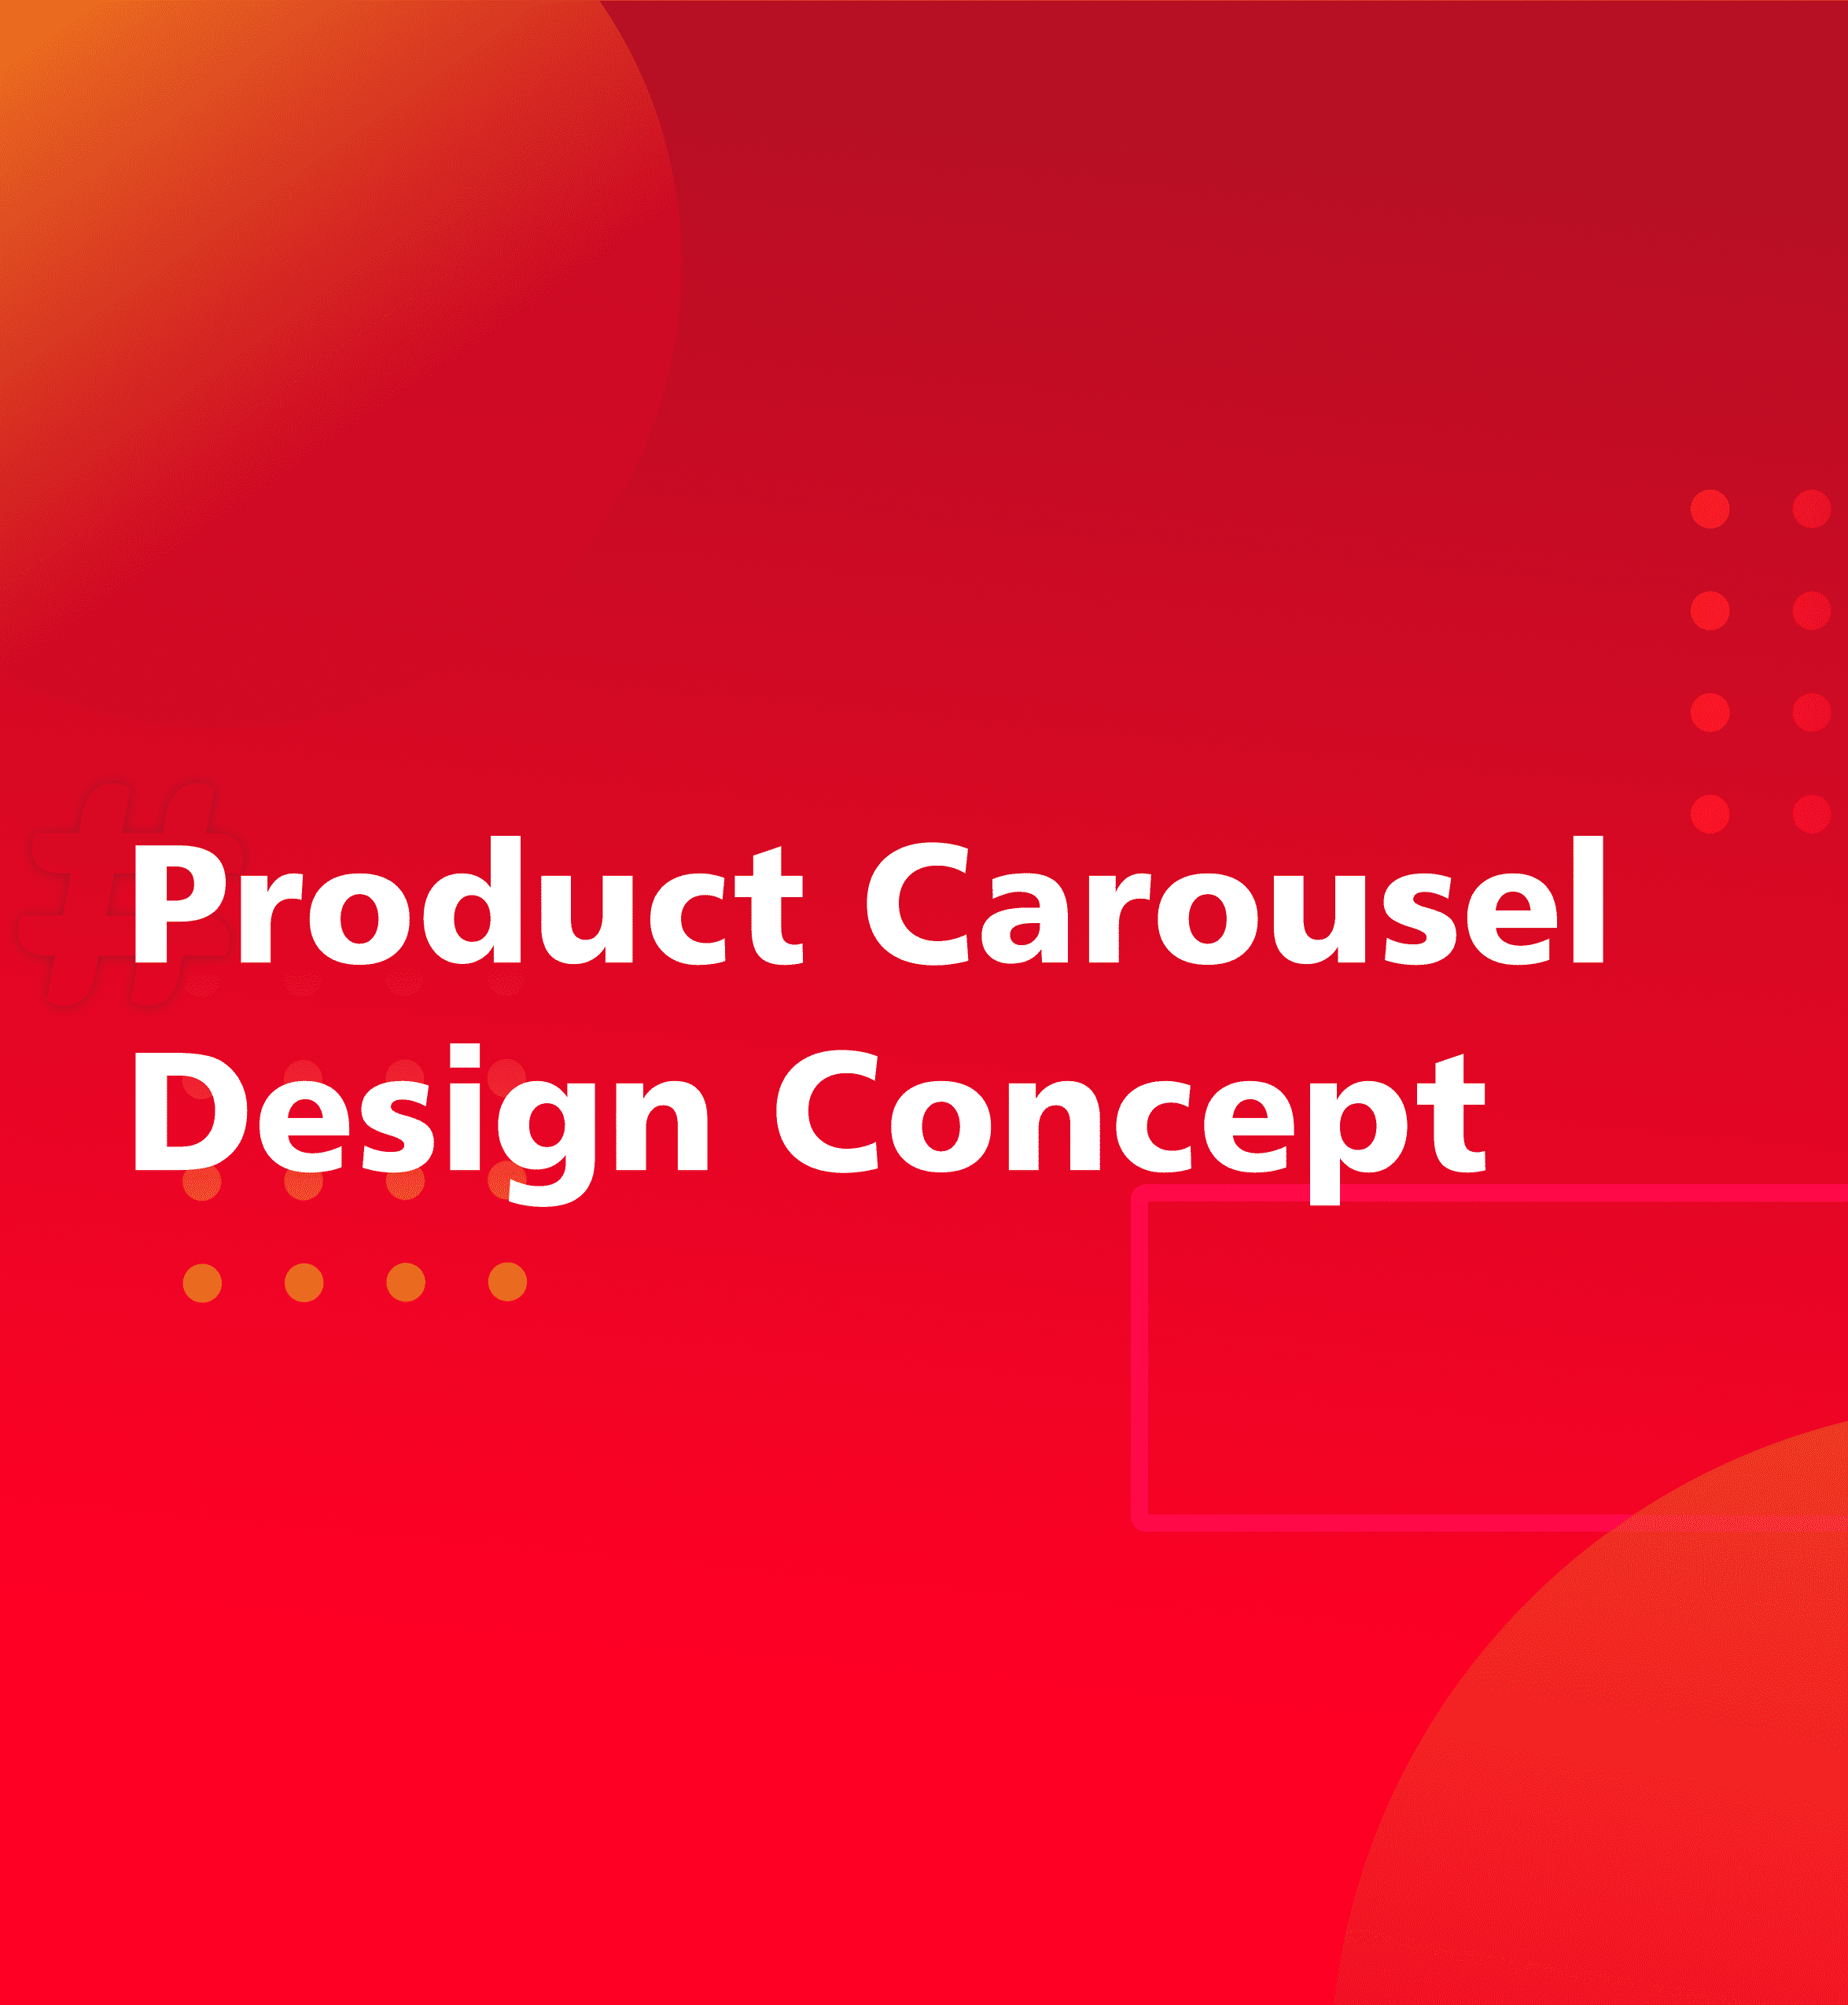 Product Carousel Design Concept